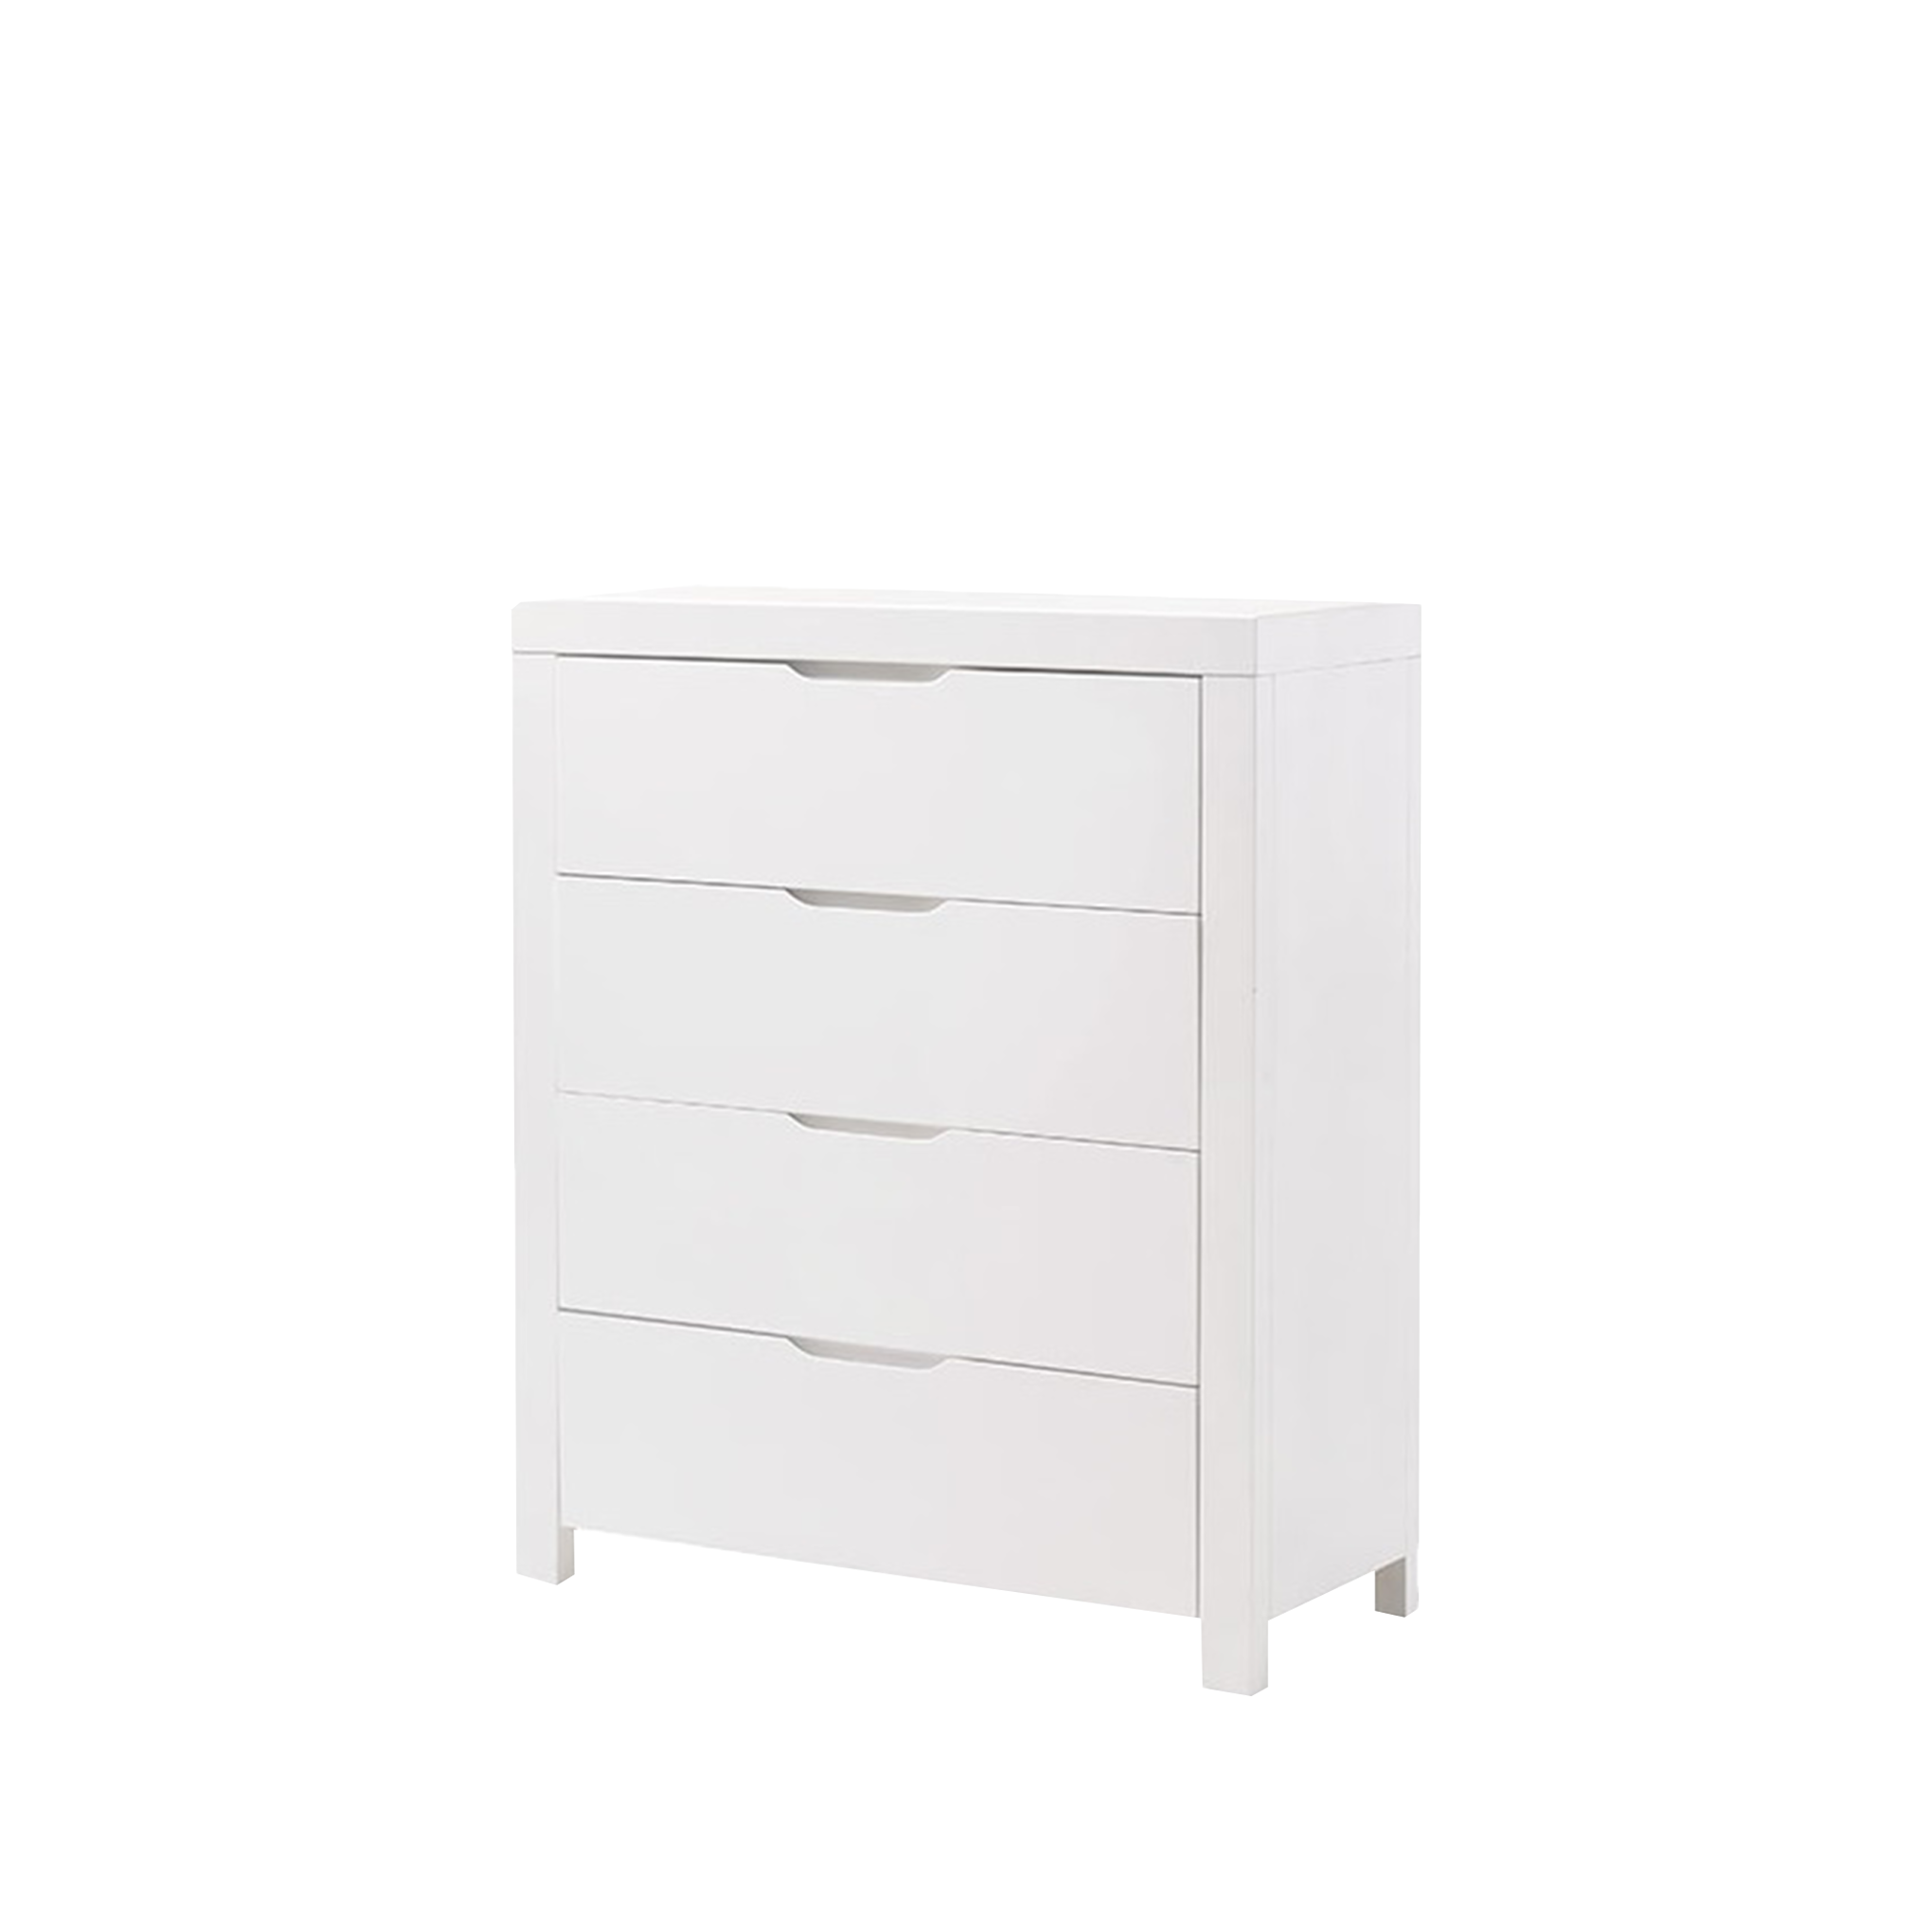 <b>Summer Chest of 4 Drawers</b><br>L900 X D400 X H1100MM